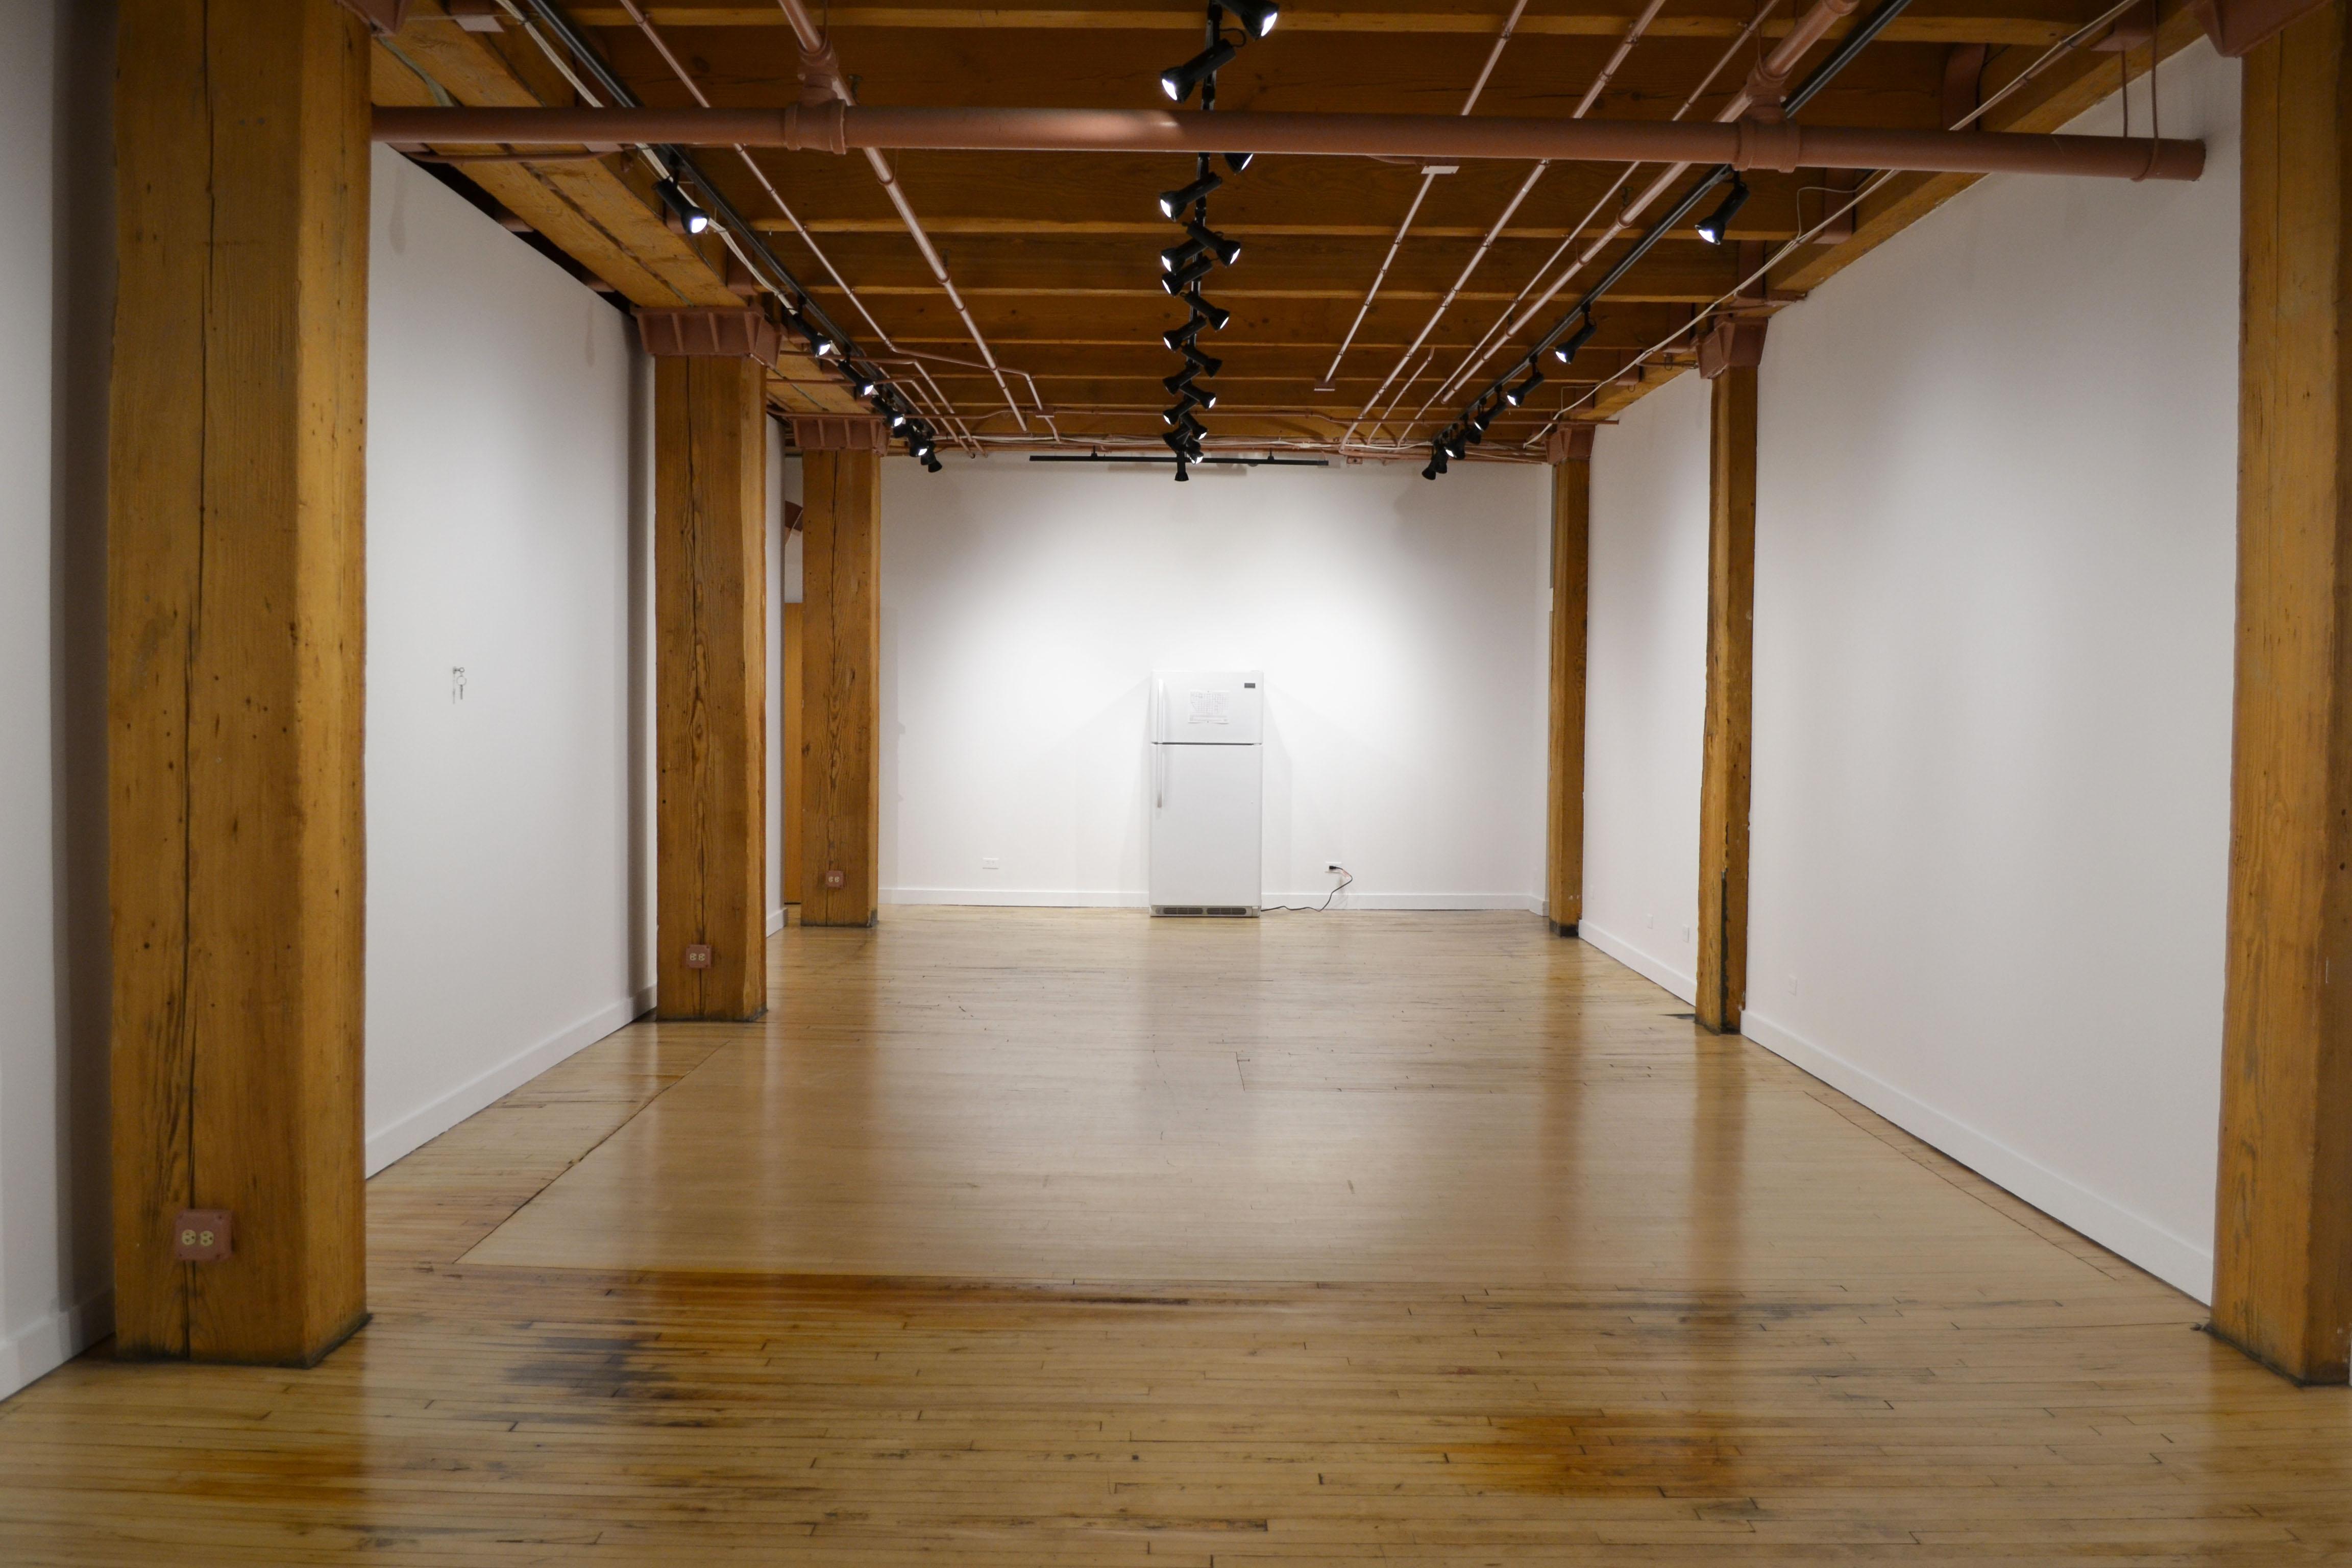 The minimalist exhibition at the Weinberg/Newton Gallery raises questions about representation in art and invites visitors to engage in the conversation surrounding homelessness. (Maya Miller / Chicago Tonight.)